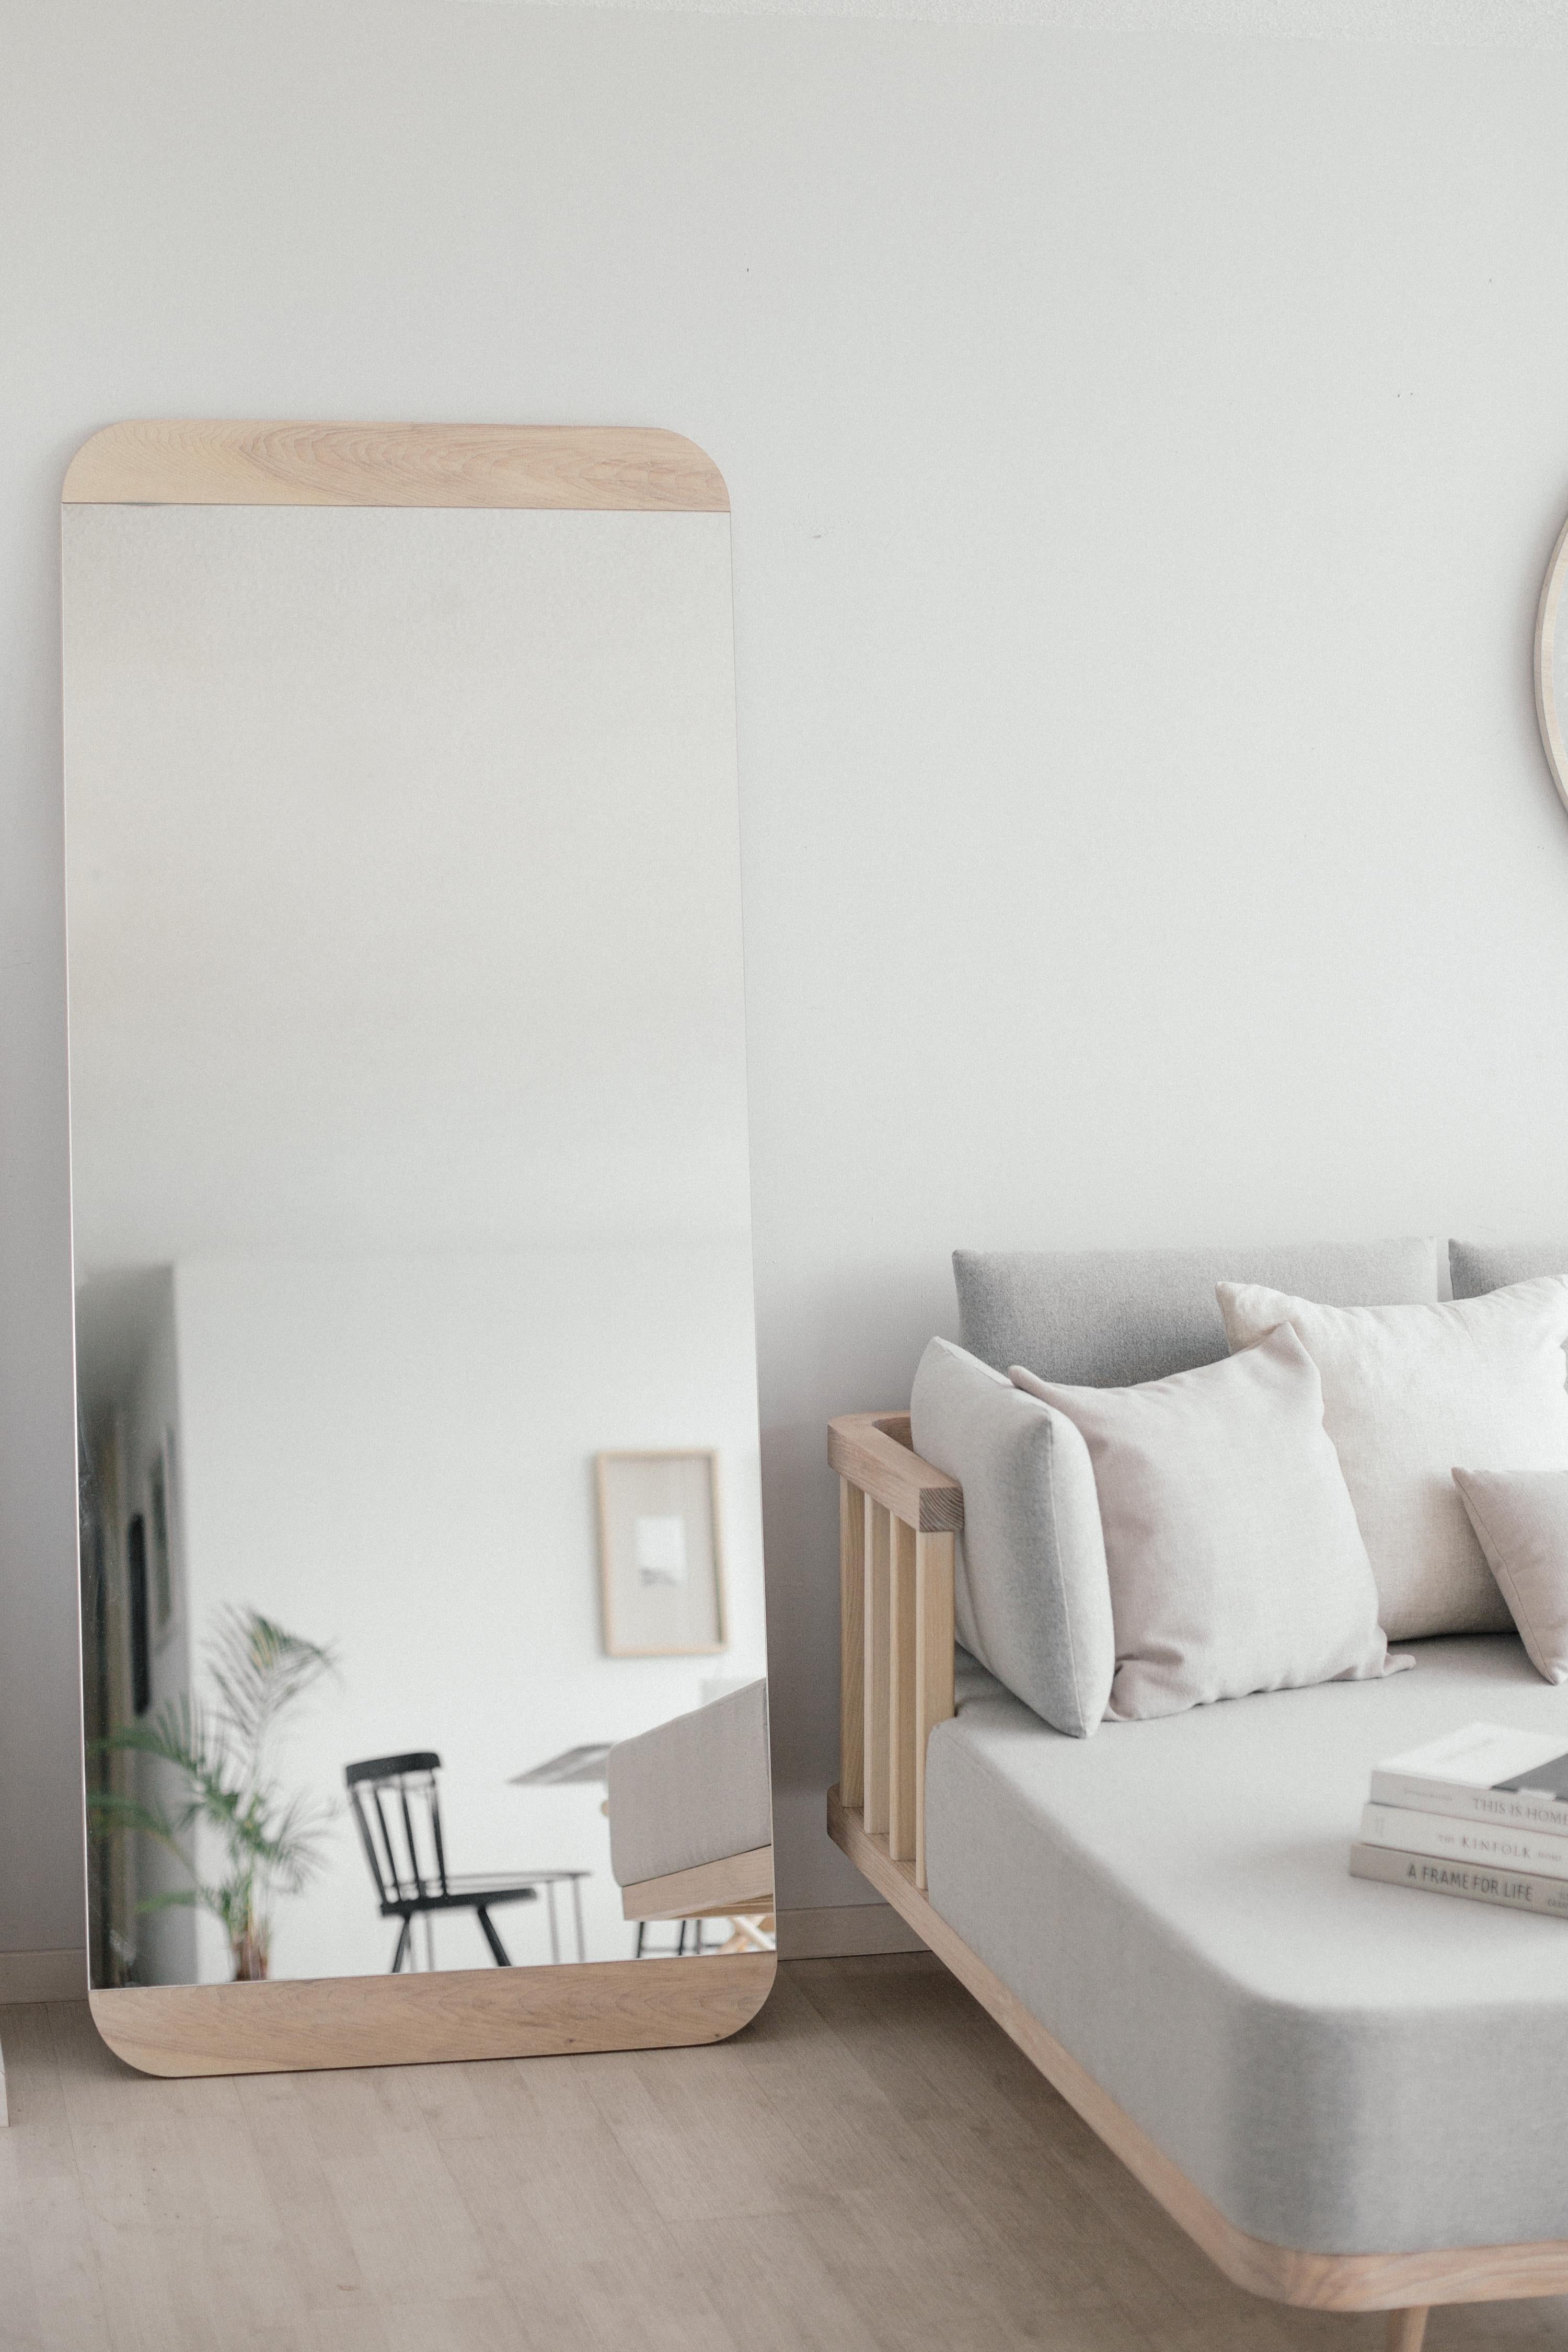 The Esteban Mirror seeks a subtle intention with its wood veneer stripes by framing the mirror with its round shape in the corners. It highlights the friendly personality of the piece and gives the perfect feeling in any room.  Production time: 6-8